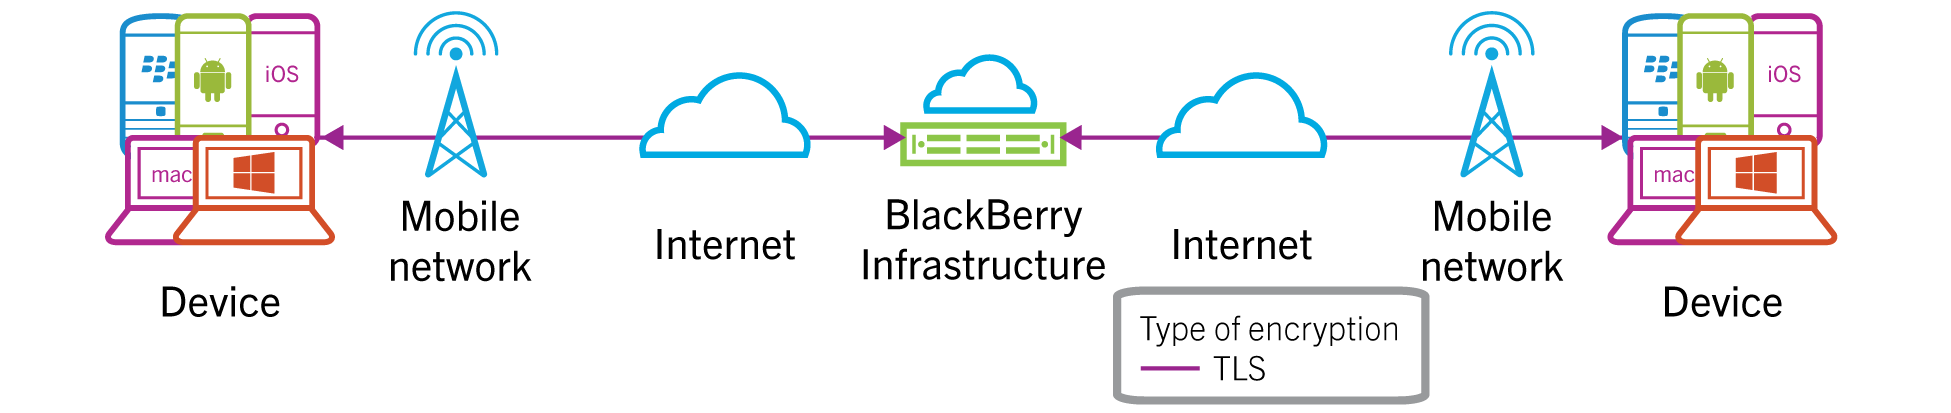 Architectural diagram showing how BBM Enterprise                        voice or video protects messages between a device on a mobile network and a                        device on a mobile network during call setup